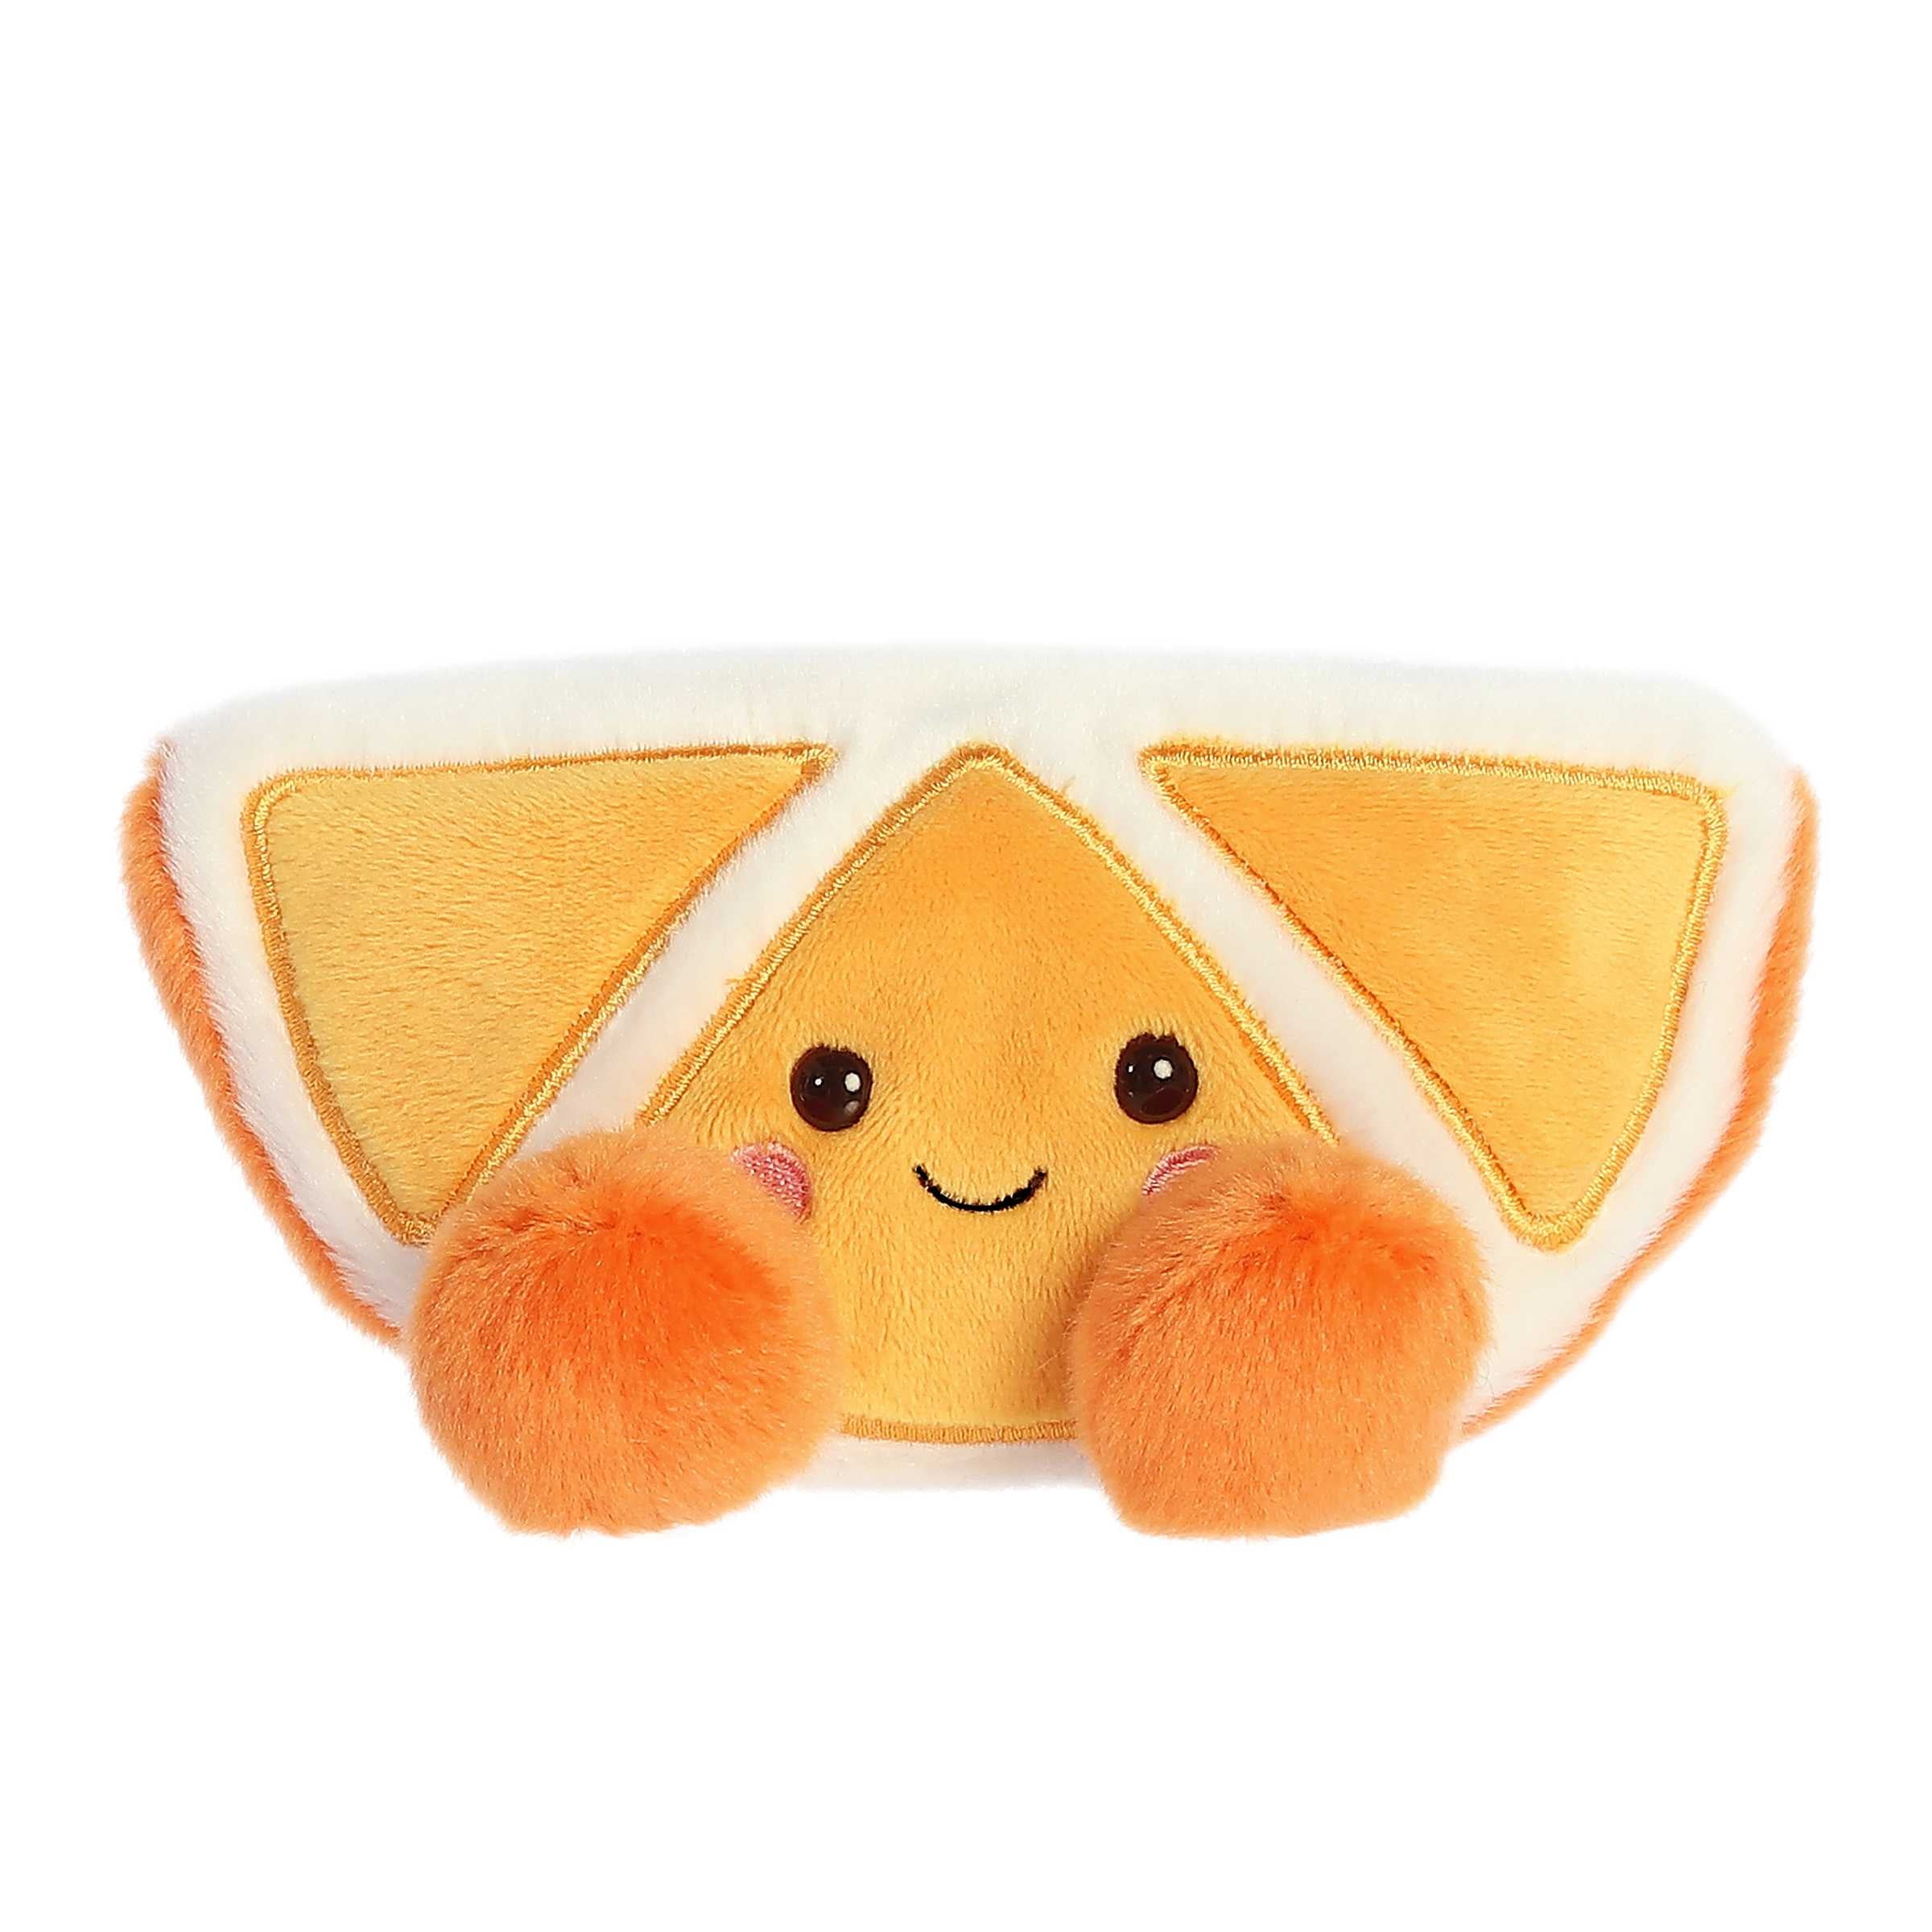 Cute soft mandarin fruit plush toy with orange and white fur body, orange toes, and a smiling face embroidery in the middle